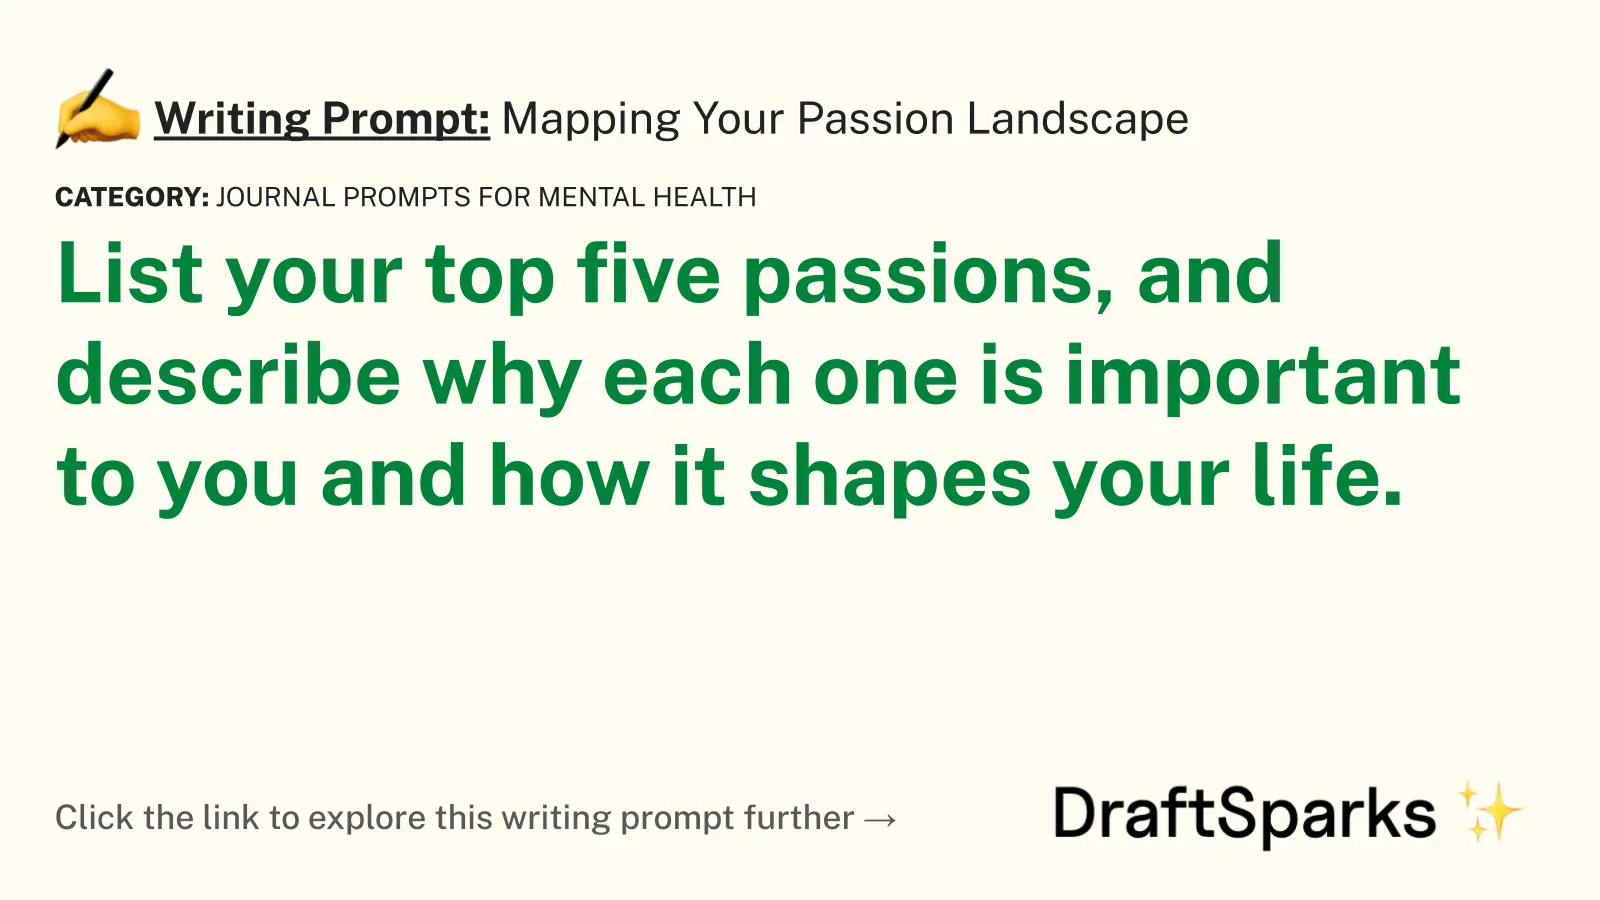 Mapping Your Passion Landscape